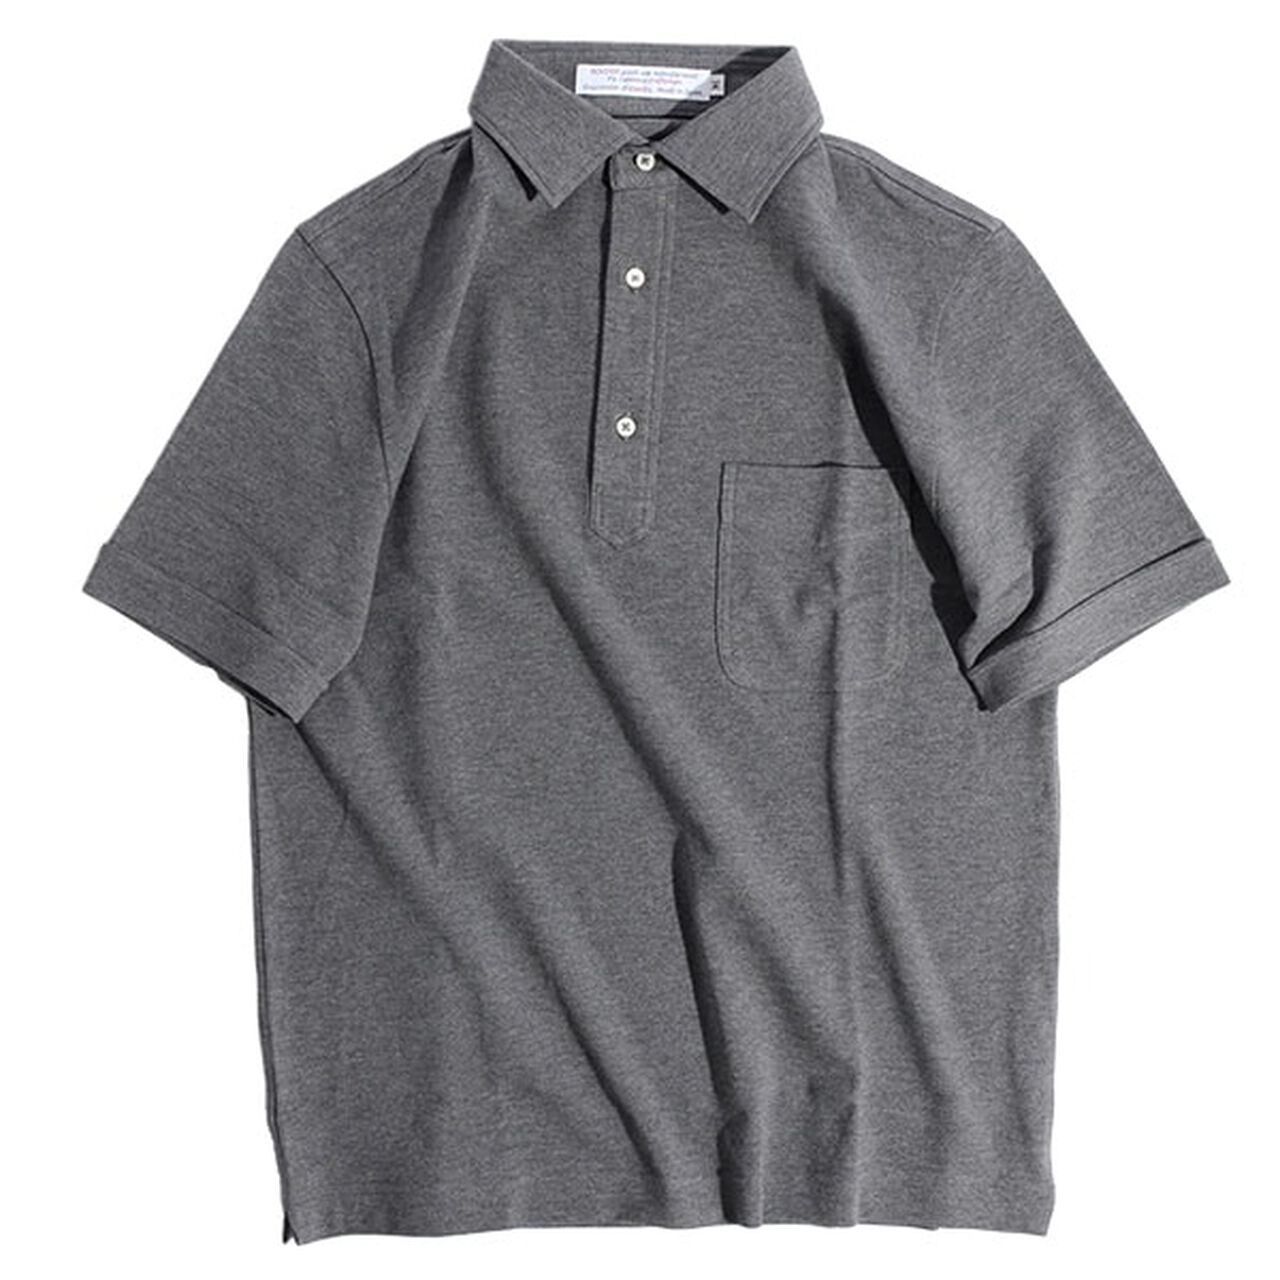 Premium Cotton Widespread Polo Shirt/Short Sleeves,Charcoal, large image number 0